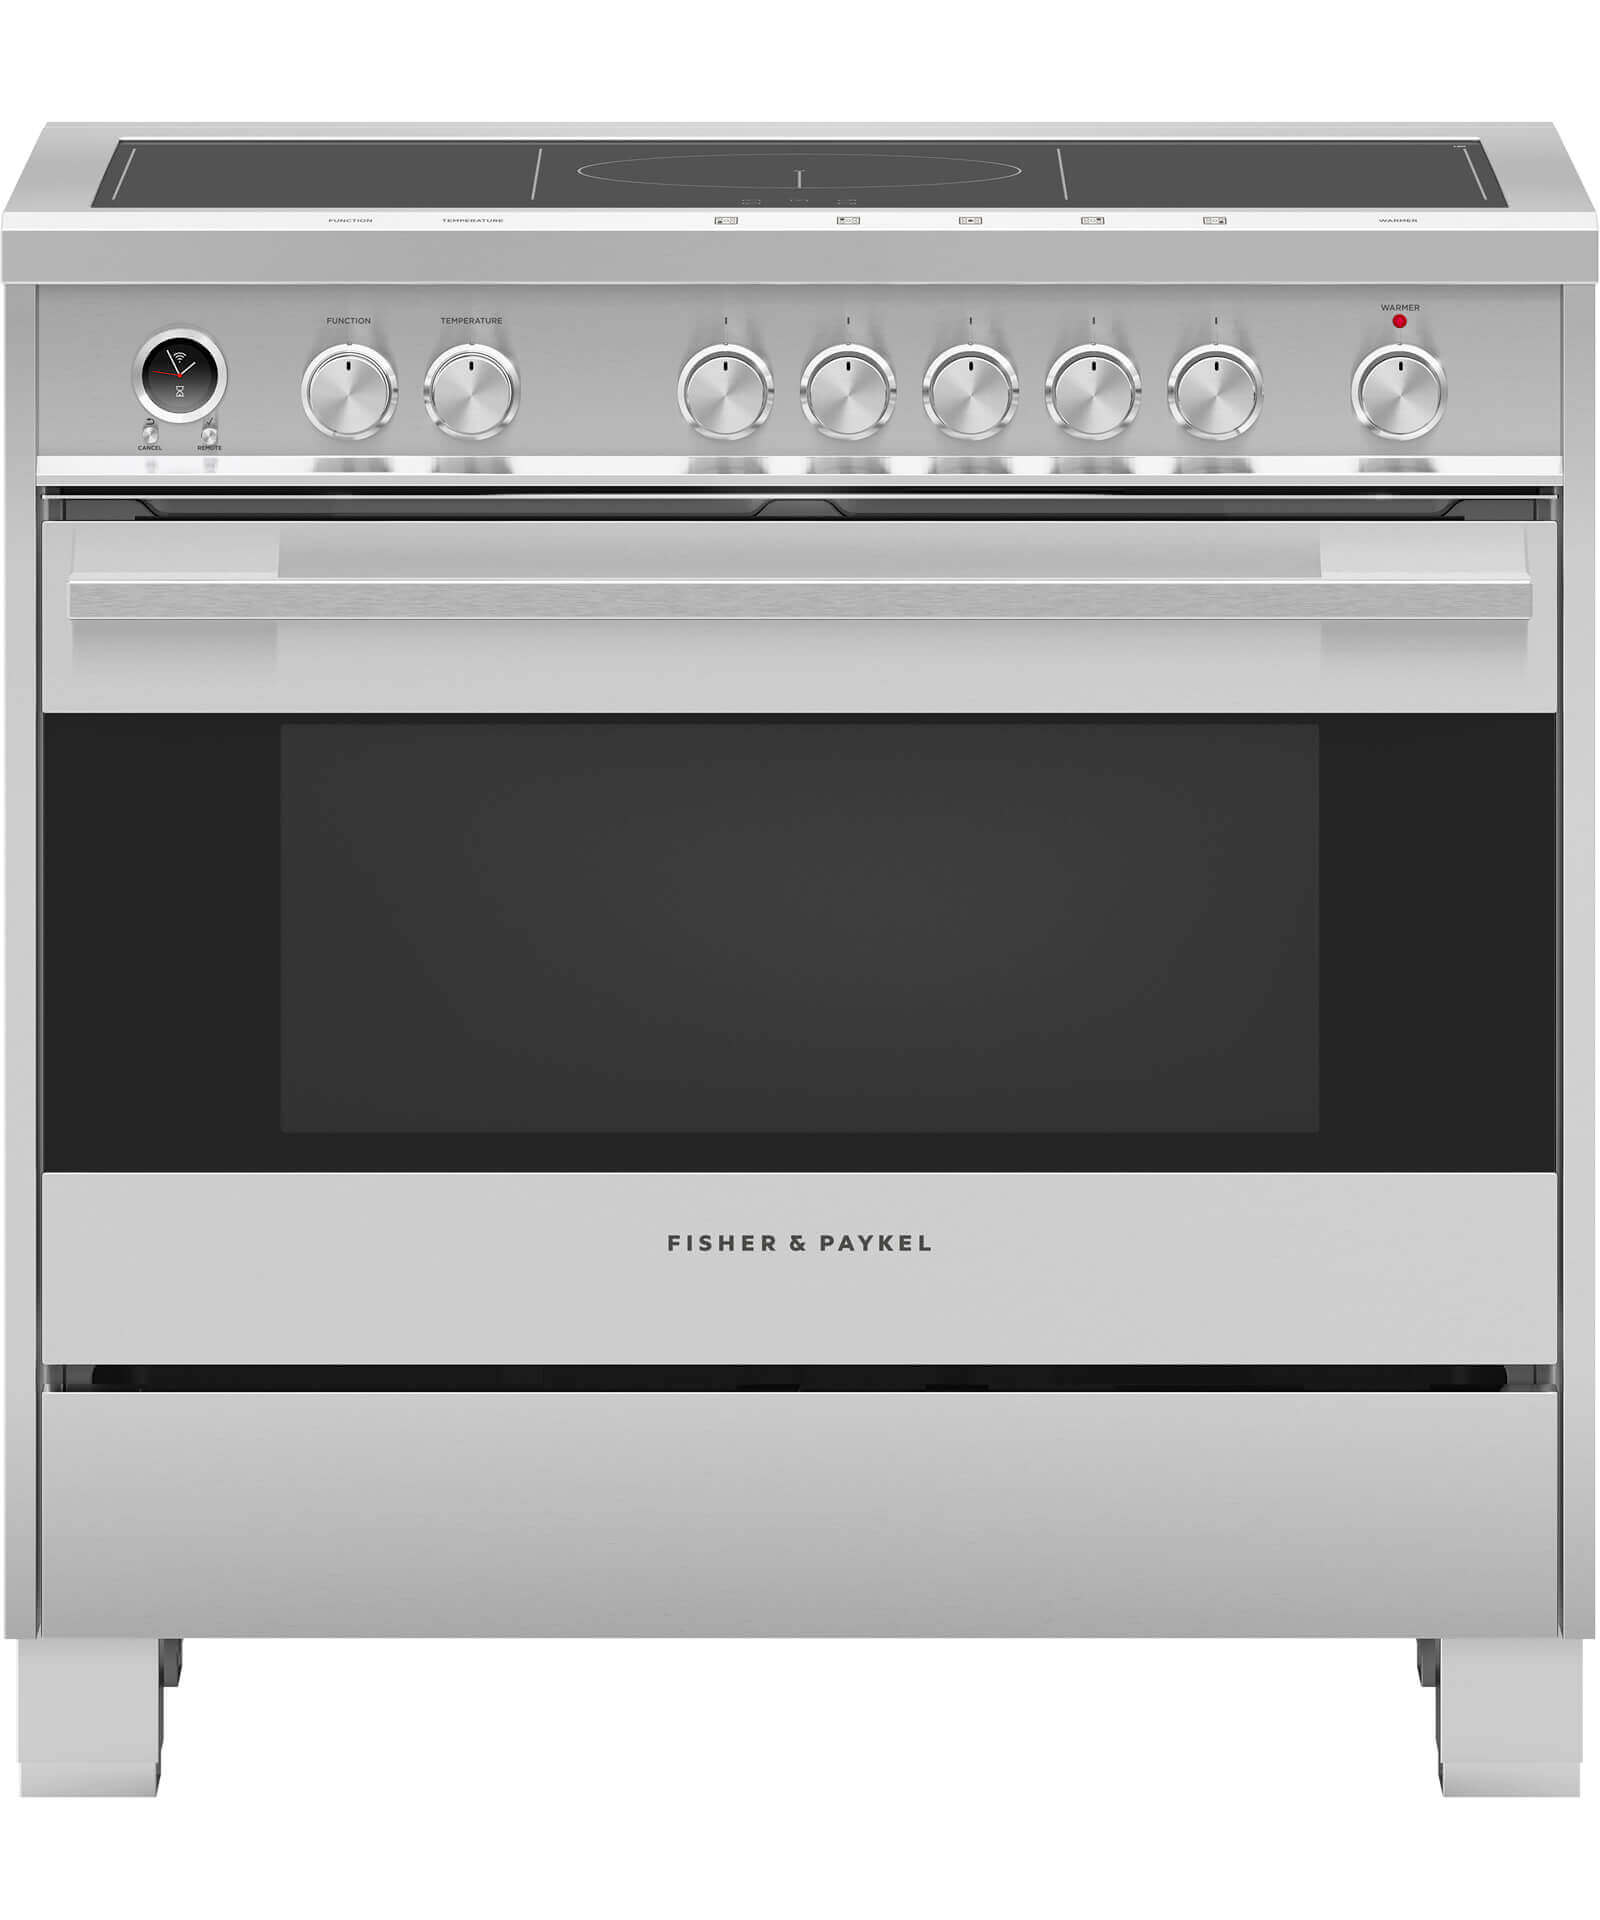 OR36SDI6X1 Induction Range 36 With Self cleaning Oven Fisher Paykel CA